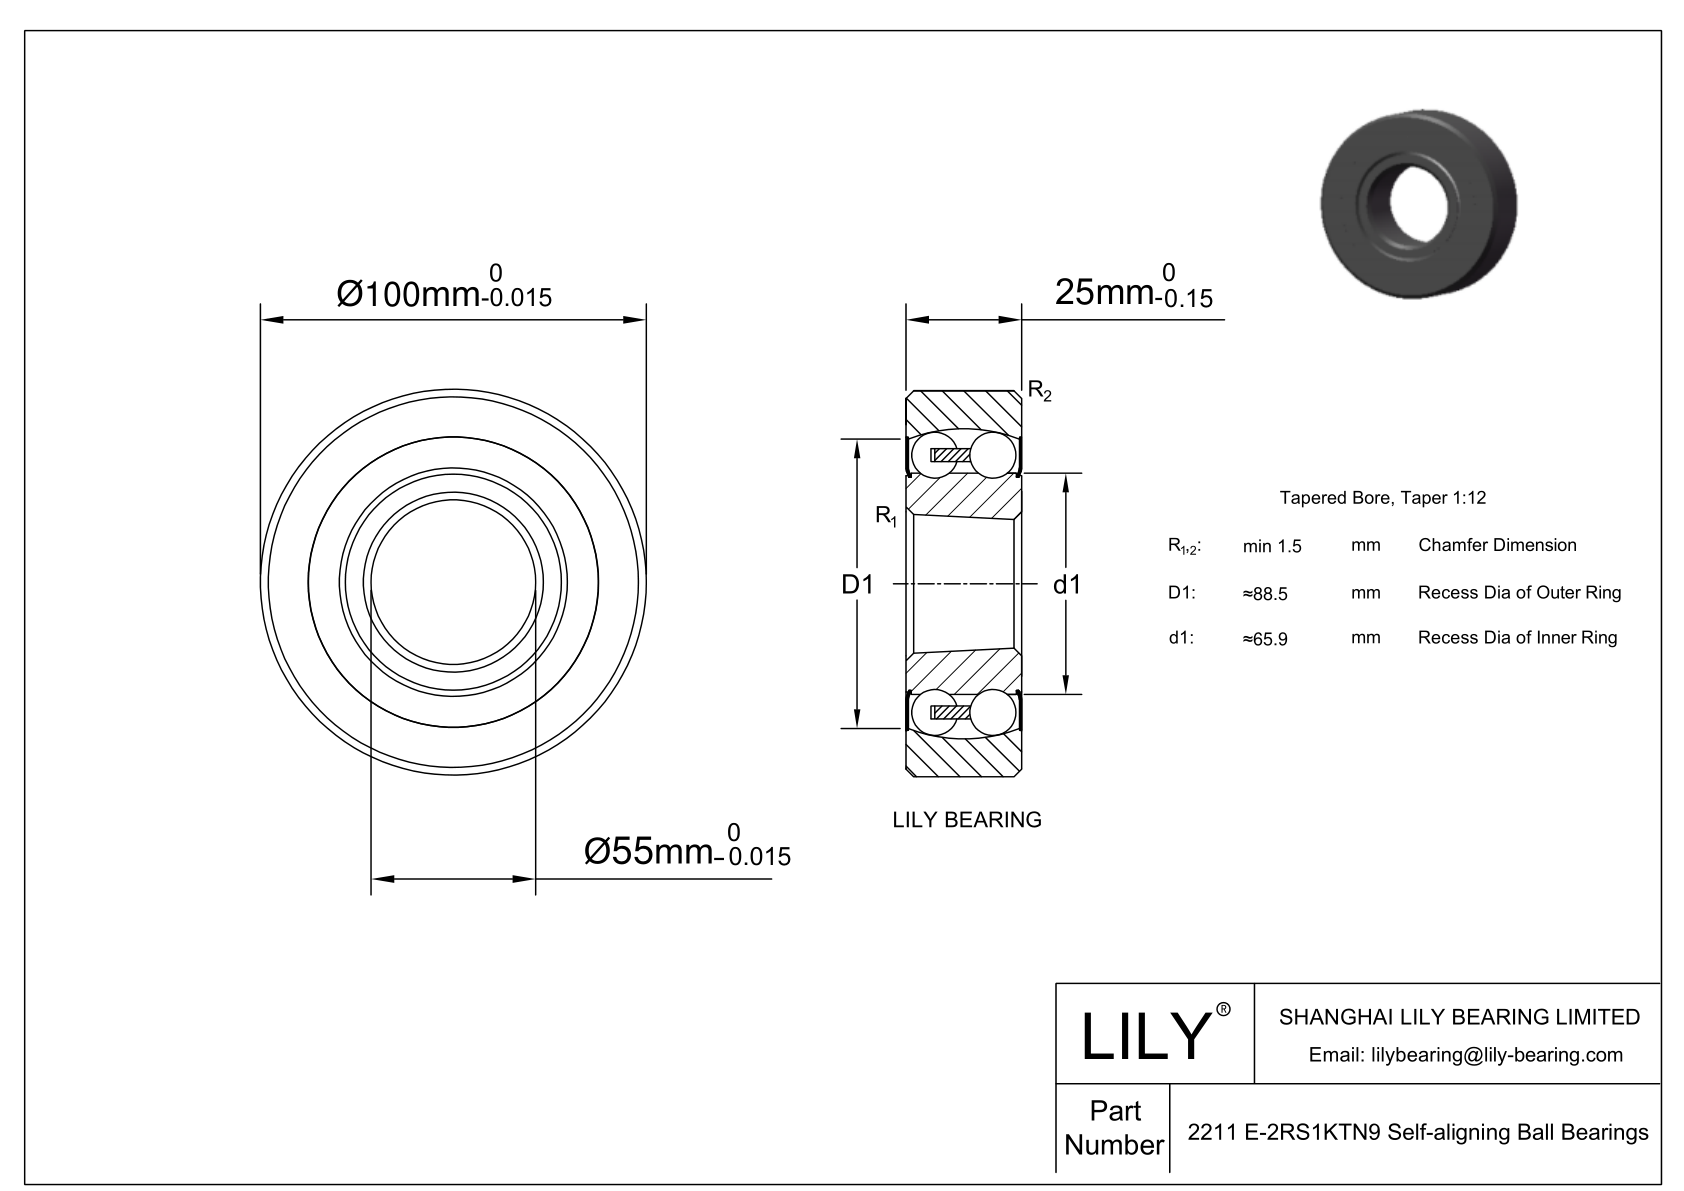 CE2211 E-SCPP Silicon Carbide Self Aligning Ball Bearings cad drawing